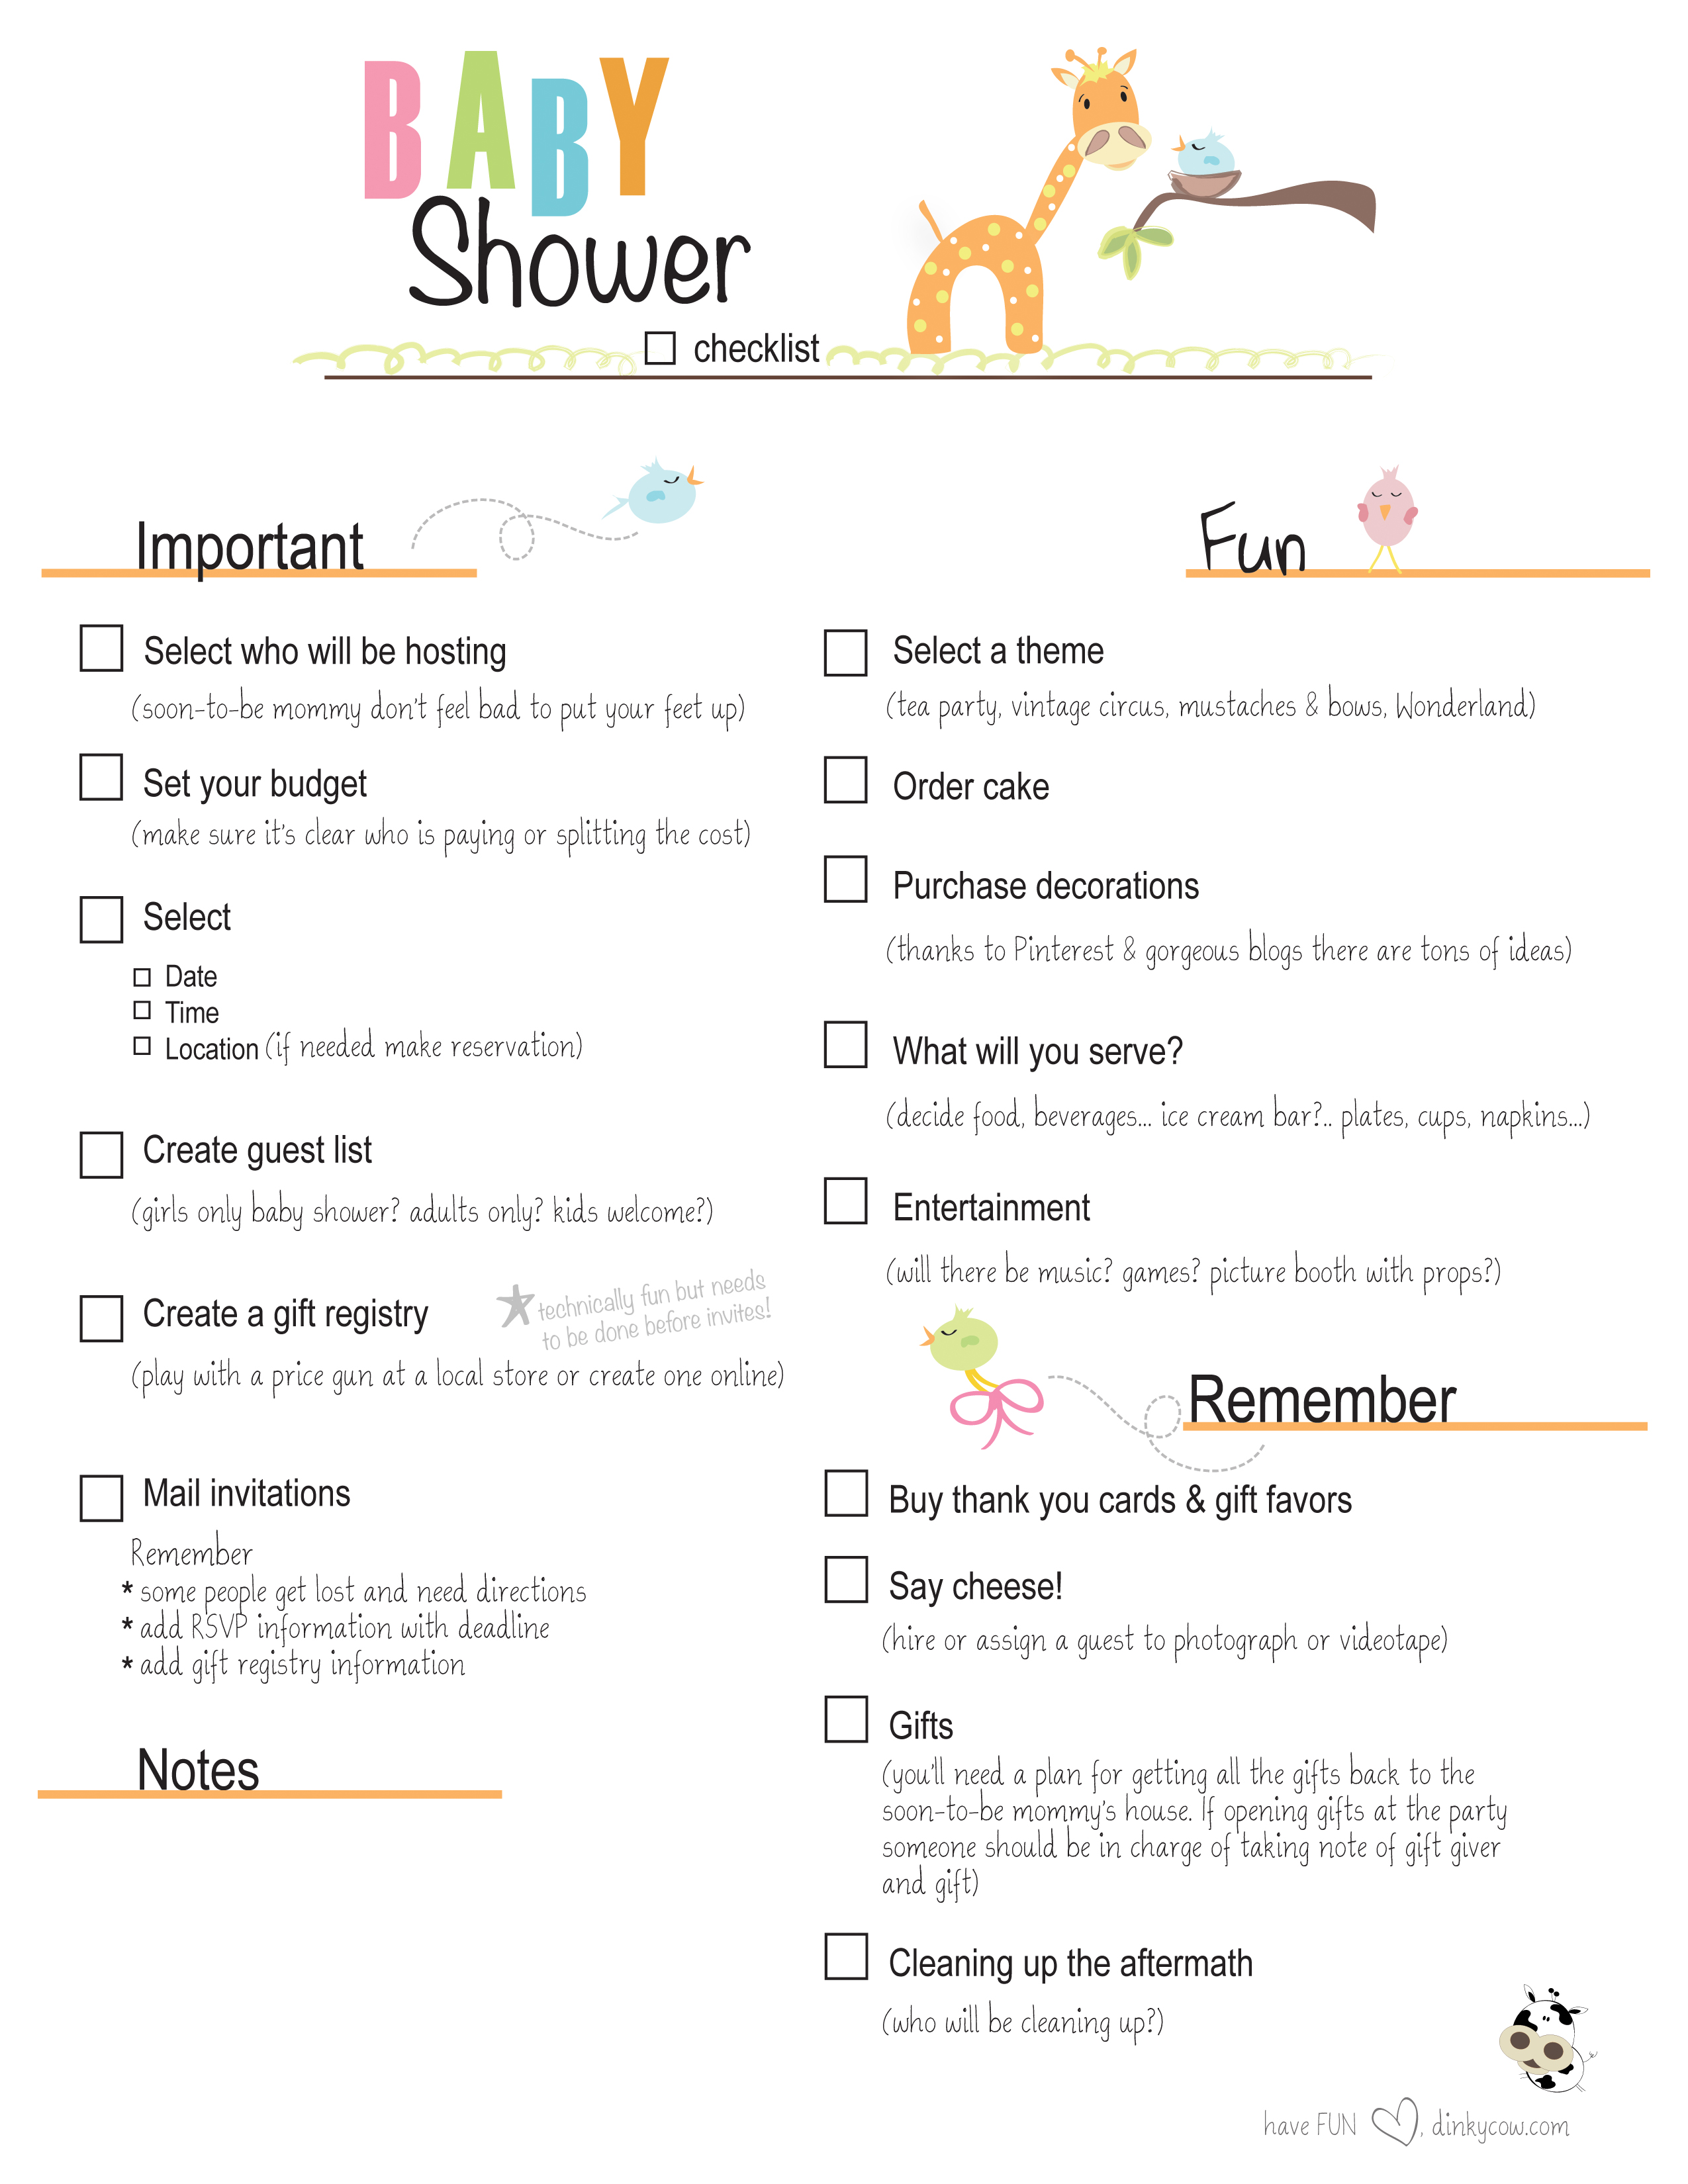 FREE 23+ Checklist Examples for Baby Showers in PDF  Examples Intended For Baby Shower Agenda Template